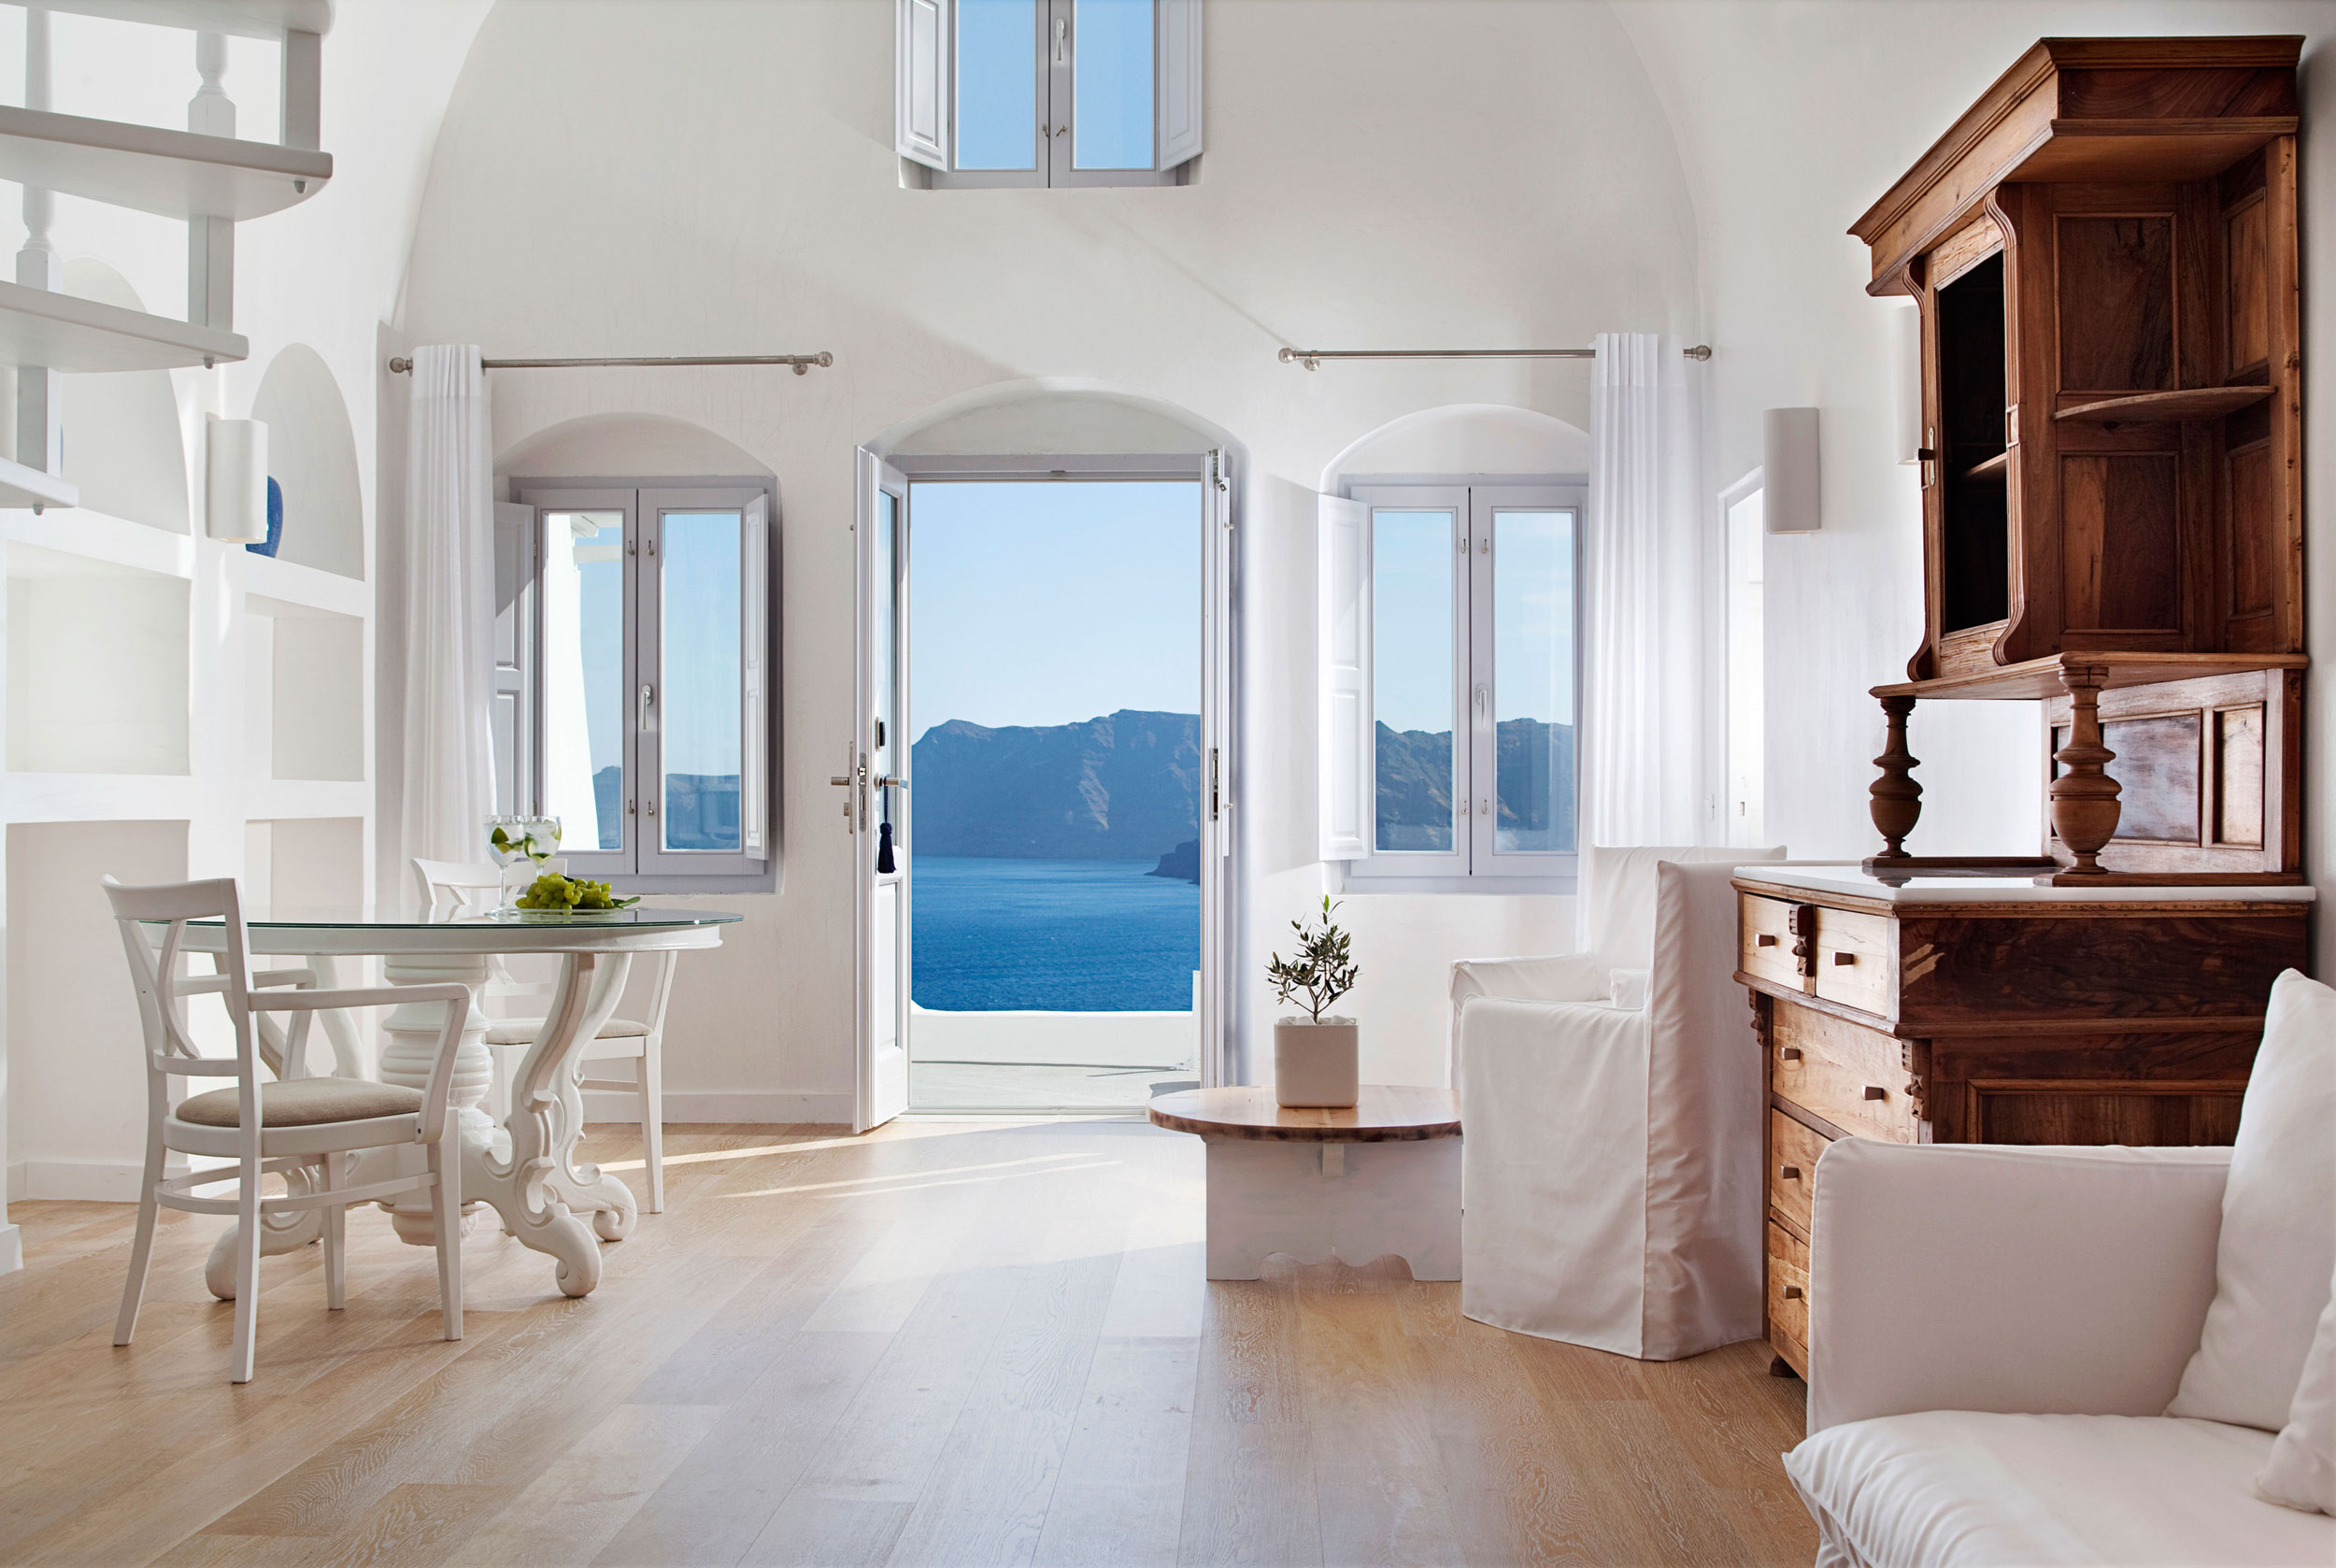 Katikies hotels in oia architecture design for Design hotel greece